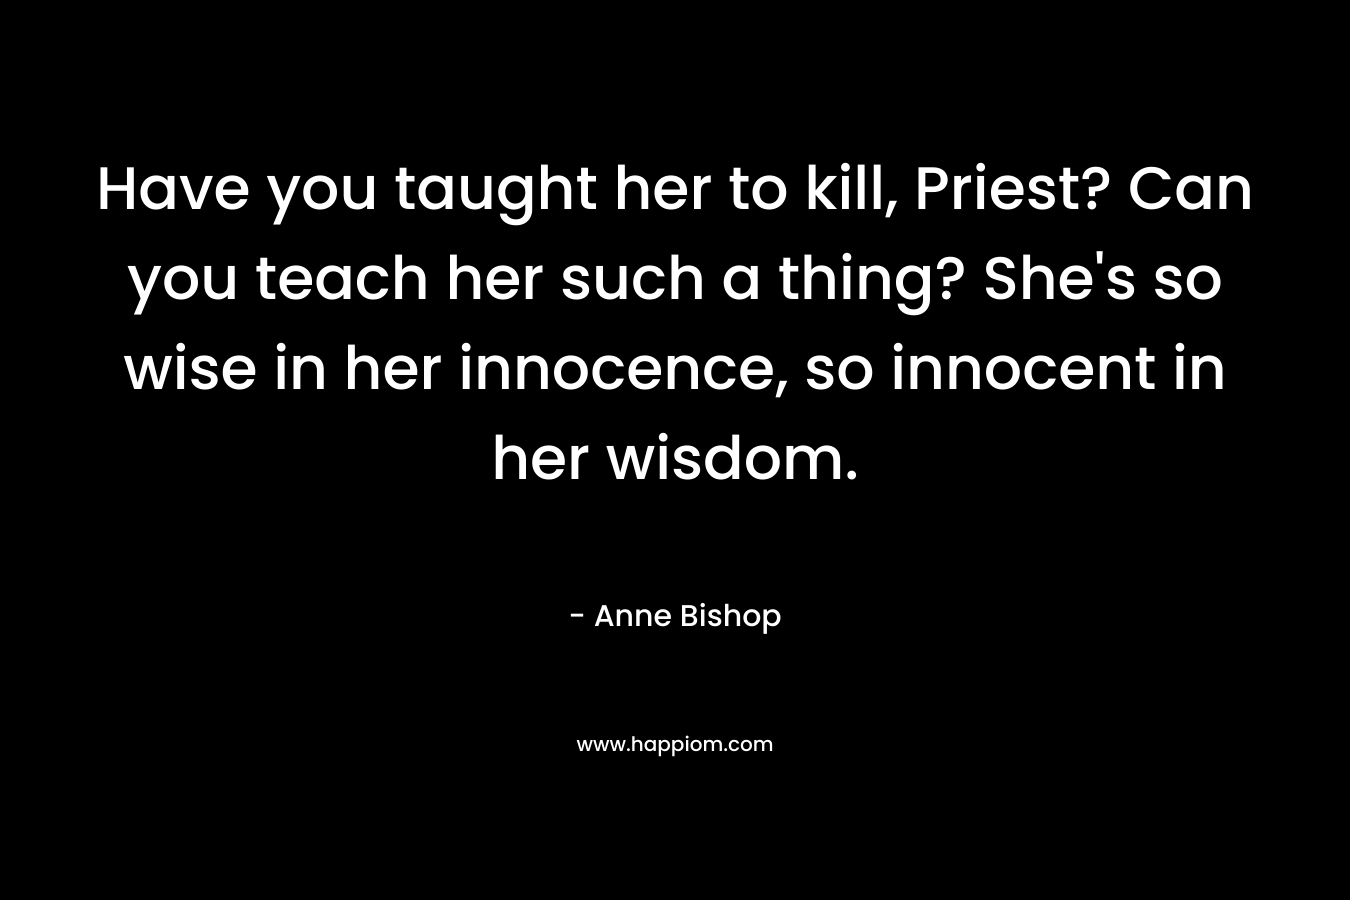 Have you taught her to kill, Priest? Can you teach her such a thing? She’s so wise in her innocence, so innocent in her wisdom. – Anne Bishop